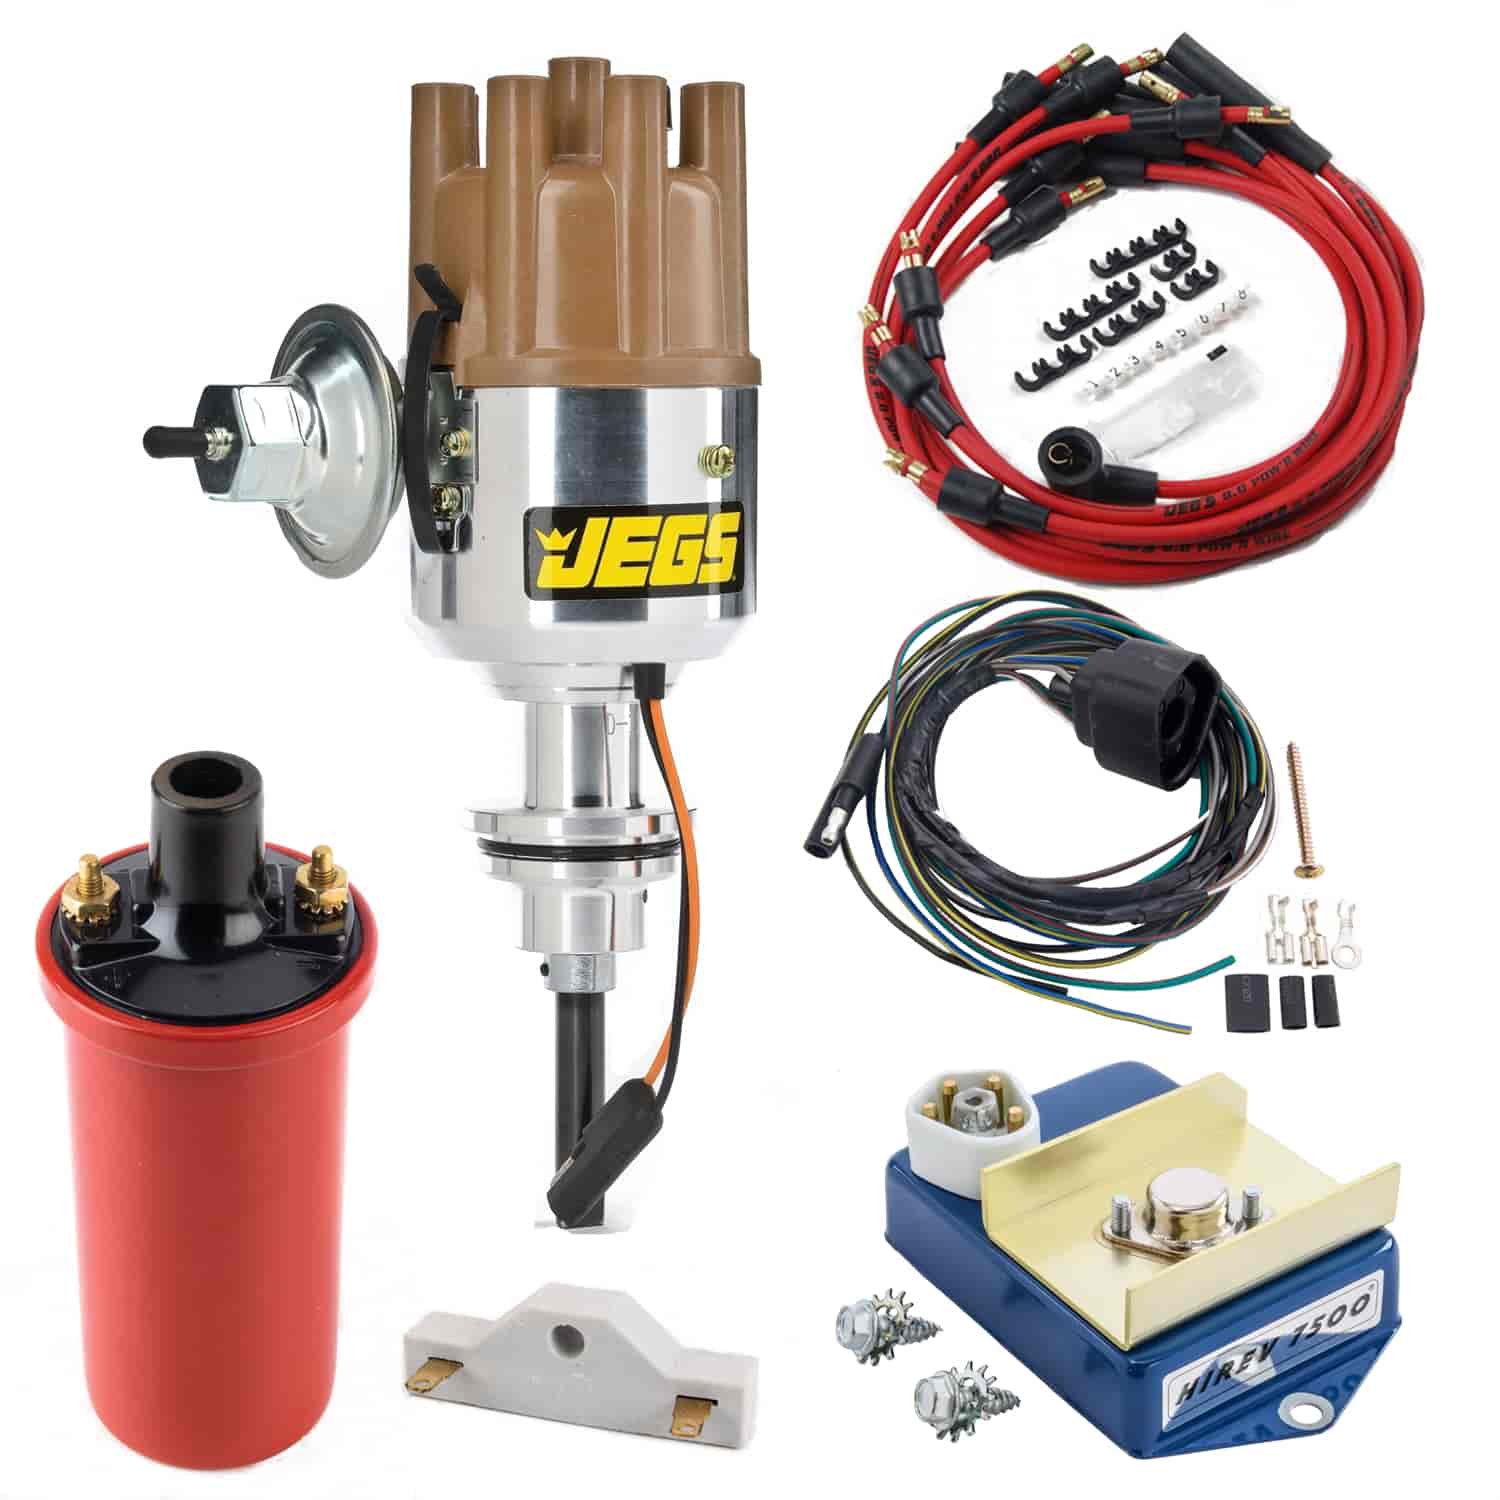 Jegs k1 Electronic Ignition Complete Kit Fits Small Block Mopar 273 318 340 360 Jegs High Performance